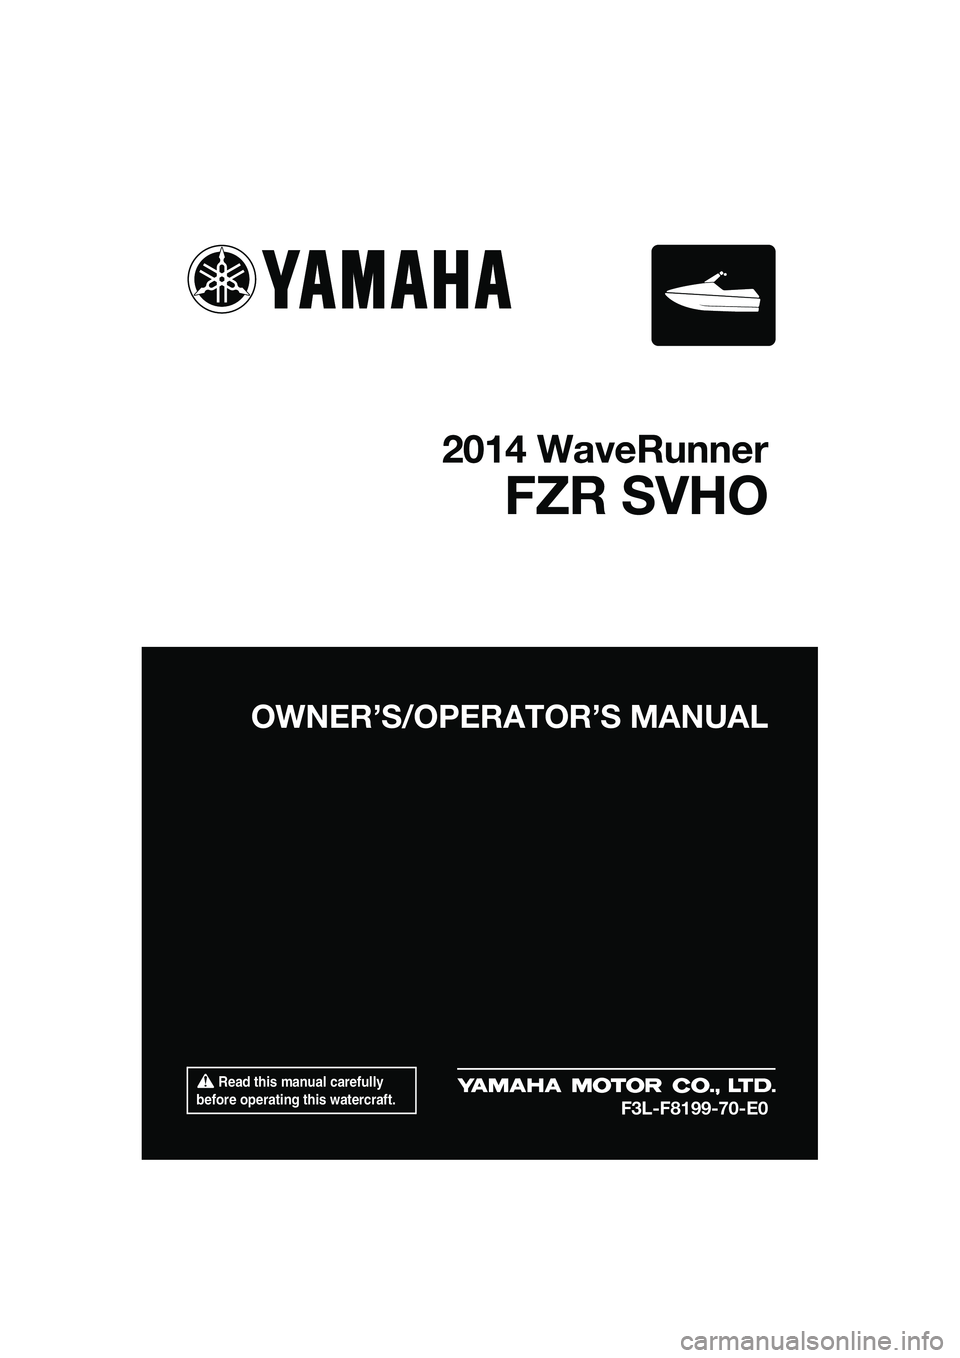 YAMAHA FZR SVHO 2014  Owners Manual  Read this manual carefully 
before operating this watercraft.
OWNER’S/OPERAT OR’S MANUAL
2014 WaveRunner
FZR SVHO
F3L-F8199-70-E0
UF3L70E0.book  Page 1  Thursday, November 7, 2013  9:08 AM 